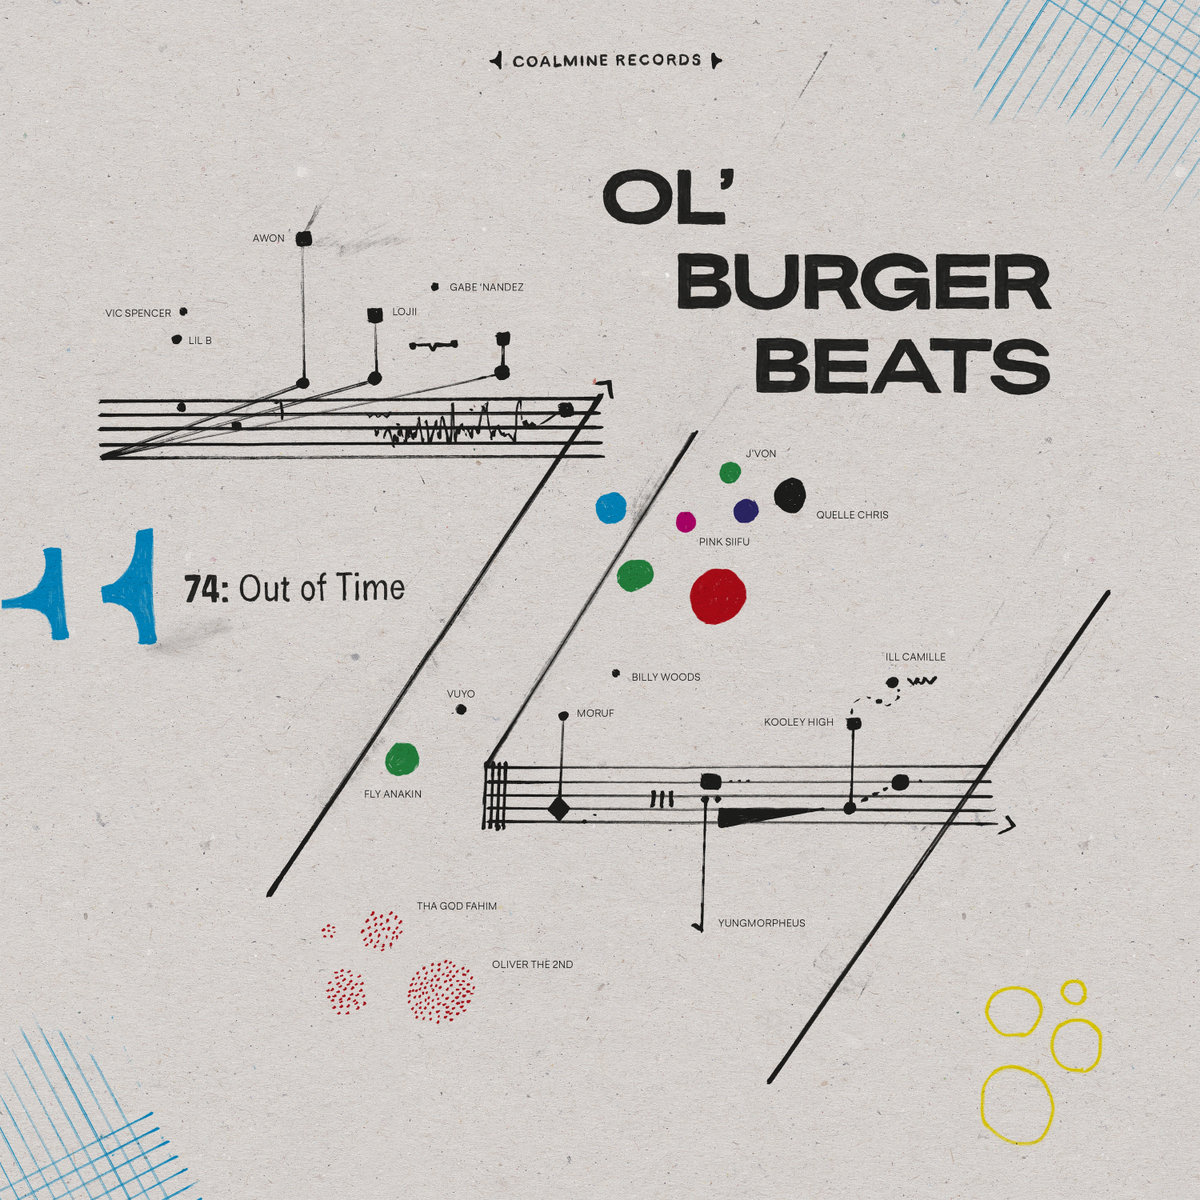 Ol’ Burger Beats – 74: Out of Time